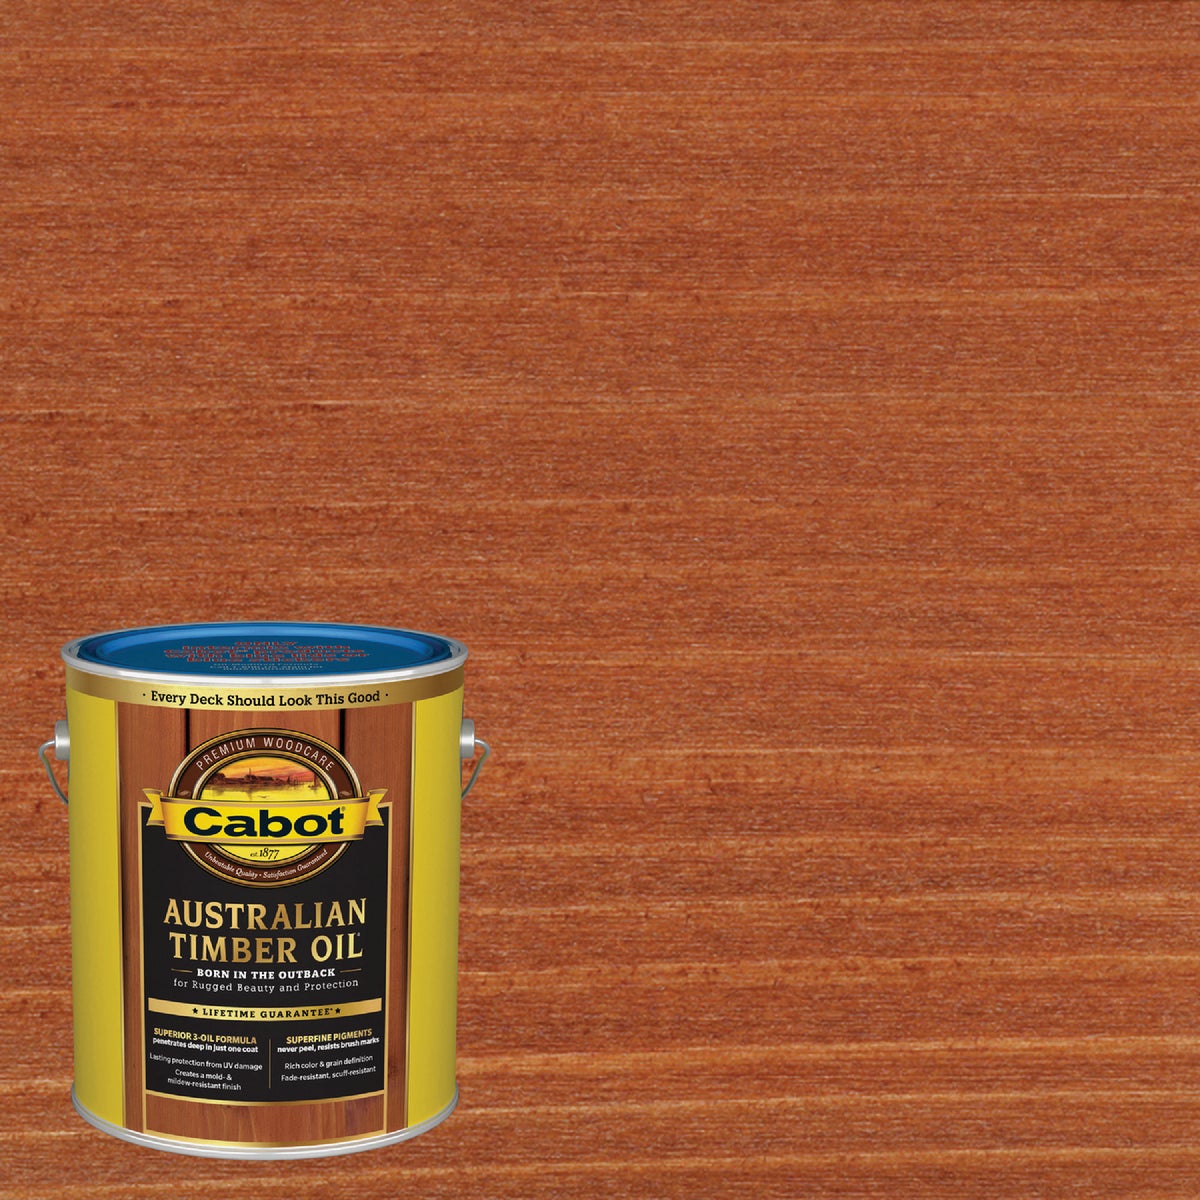 Cabot Australian Timber Oil Water Reducible Translucent Exterior Oil Finish, Mahogany Flame, 1 Gal.